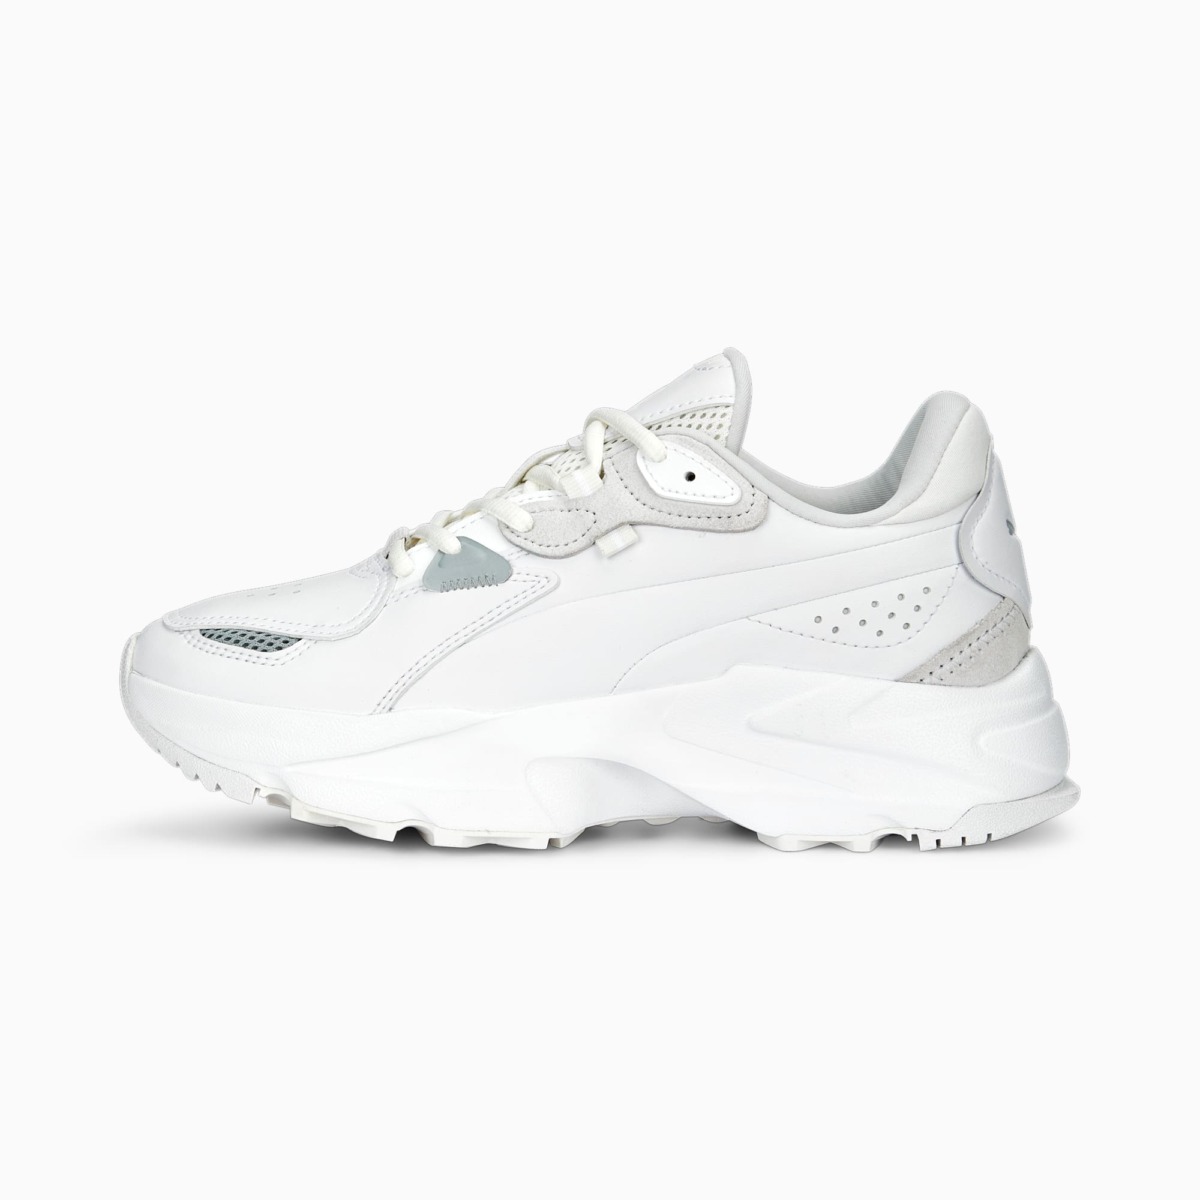 Puma White Orkid Sports Shoes For Women Womens SPORTS SHOES GOOFASH